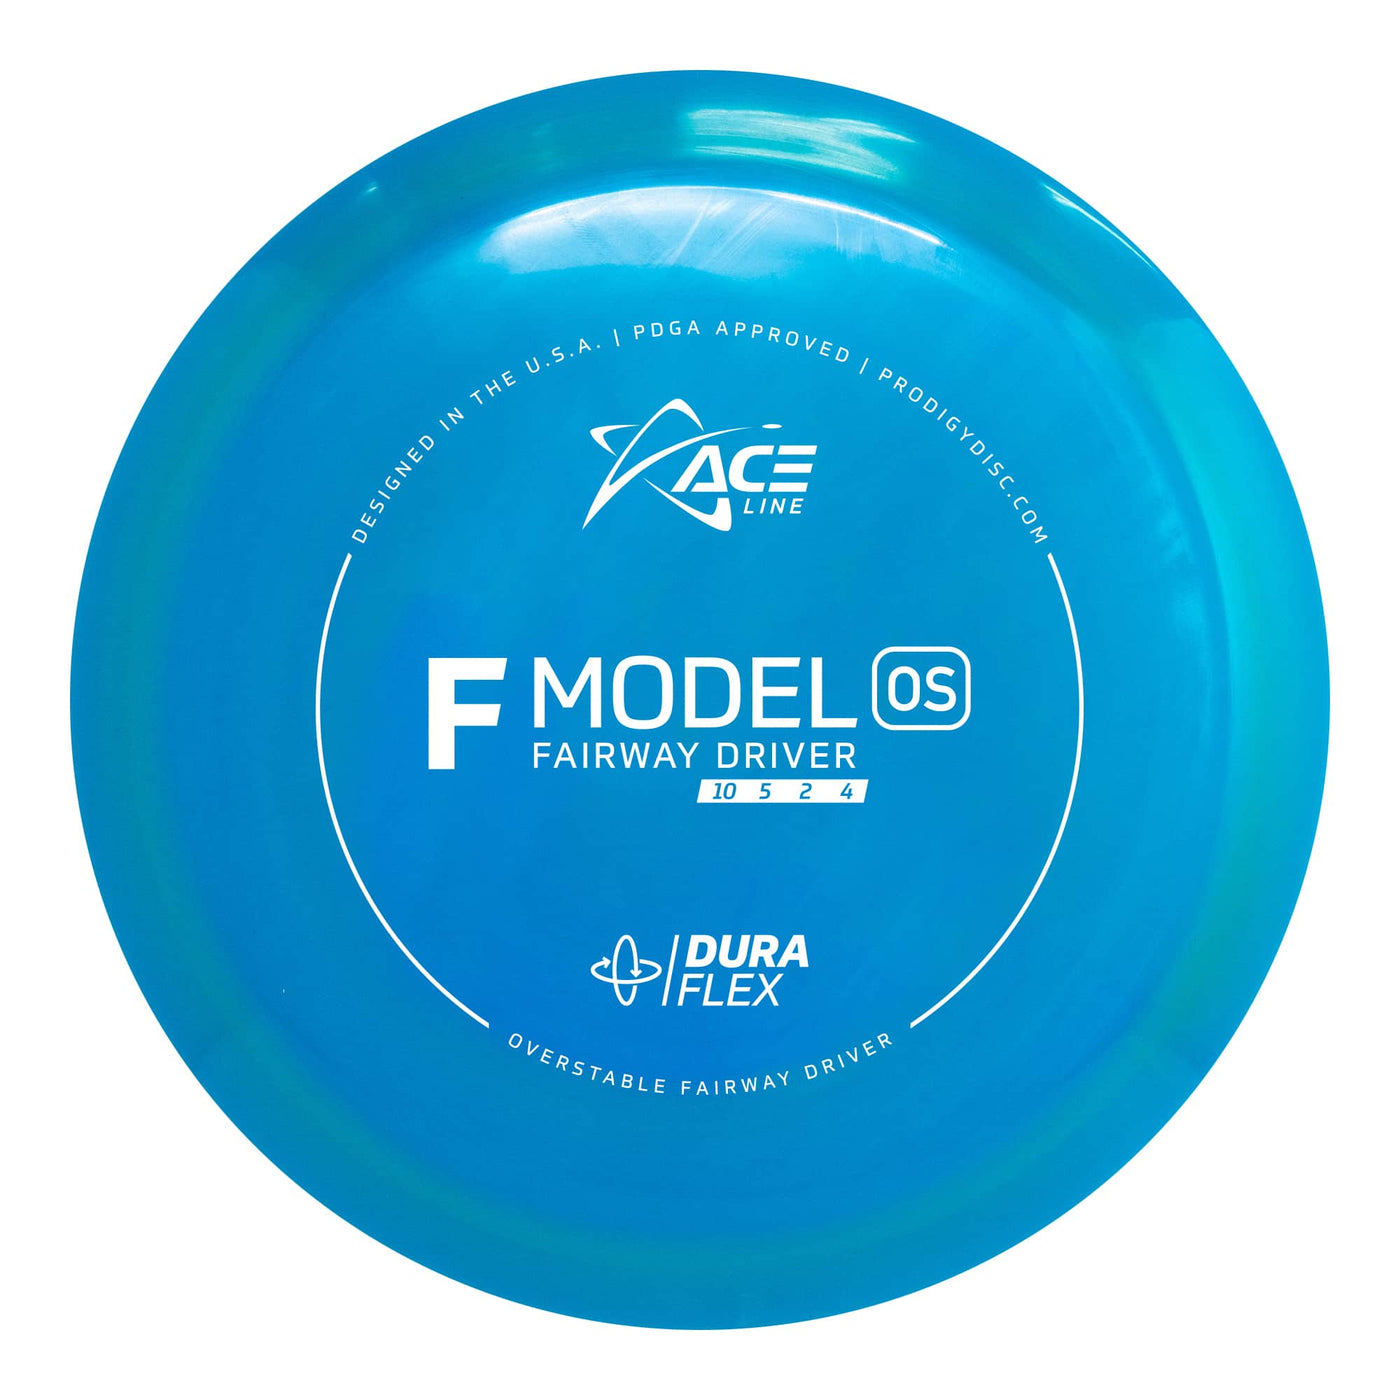 Prodigy Ace Line F Model OS Fairway Driver